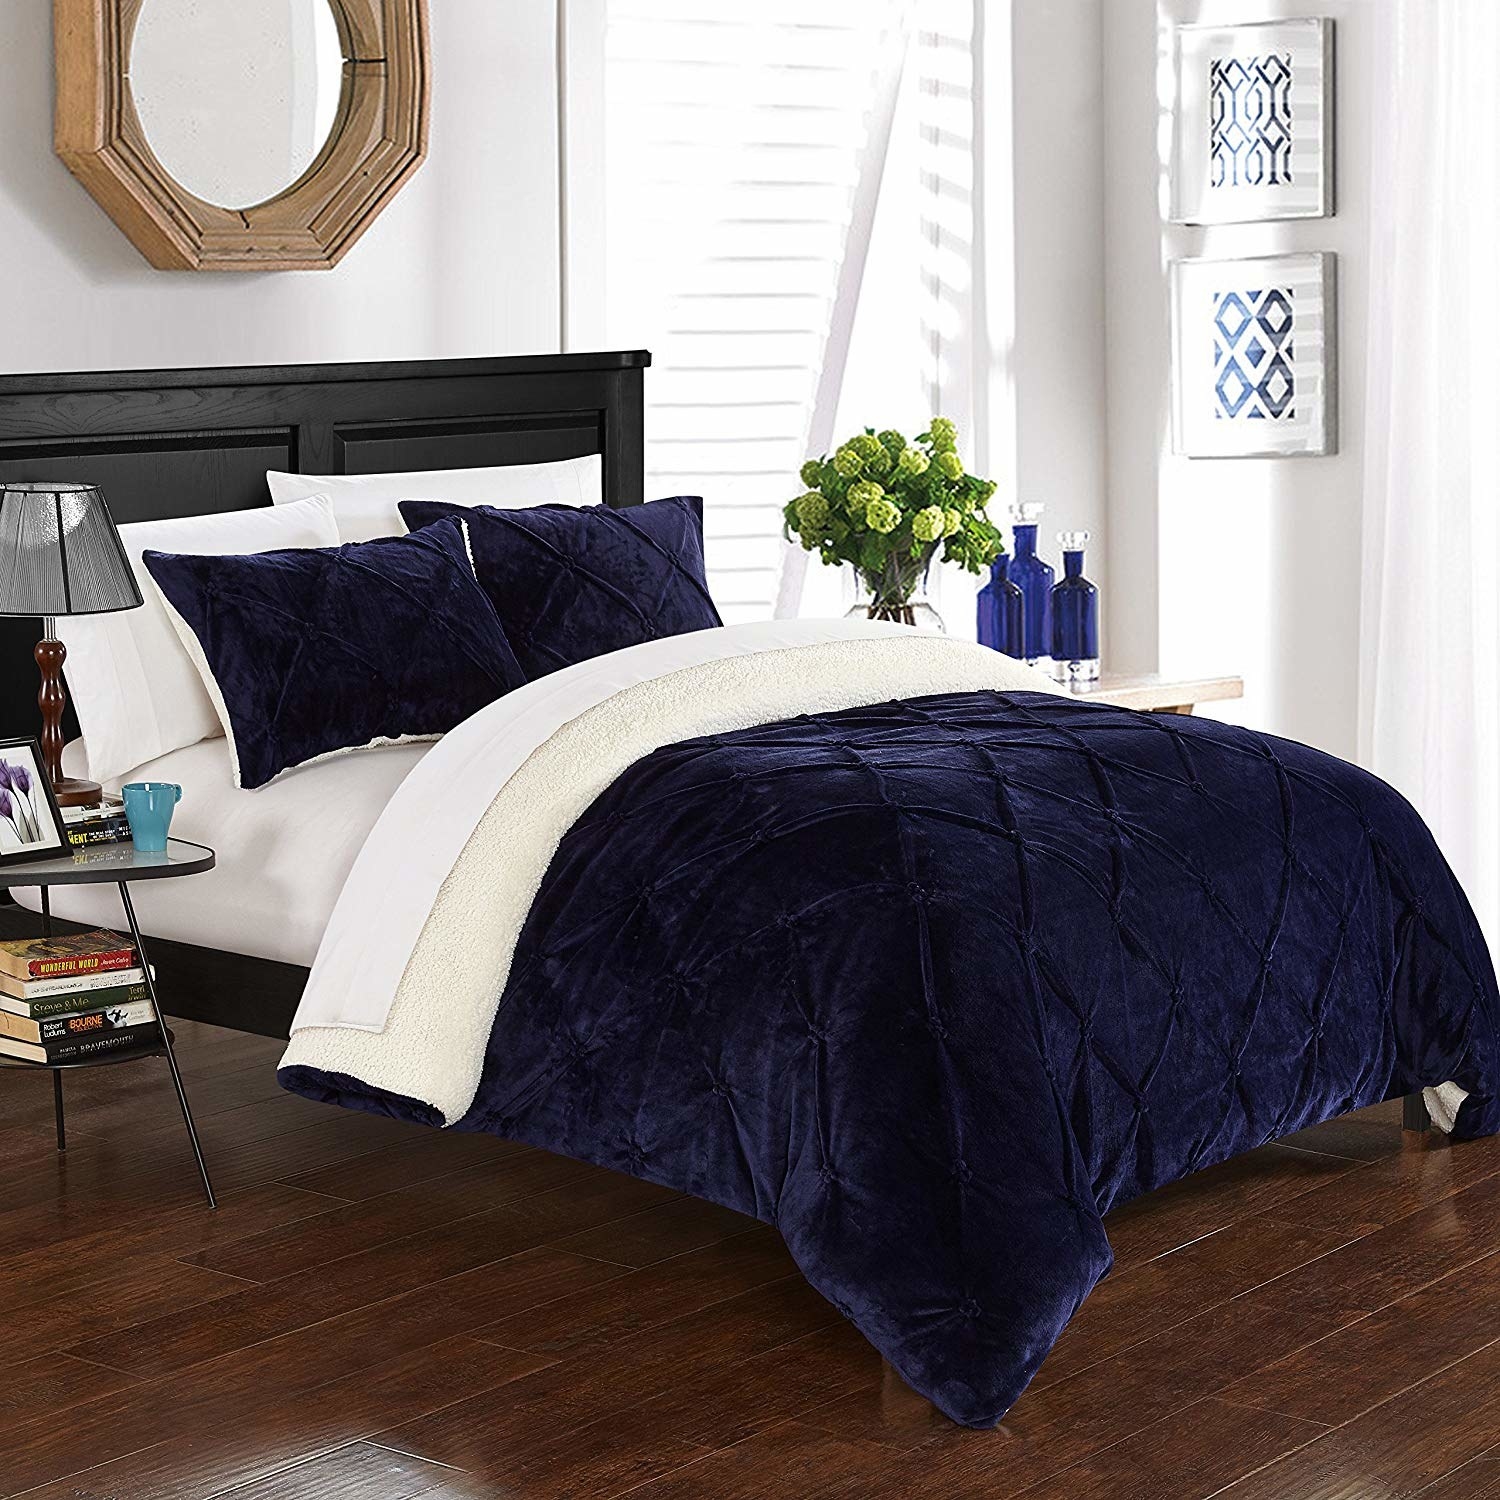 the dark blue pleated duvet set with white sheets and white pillows